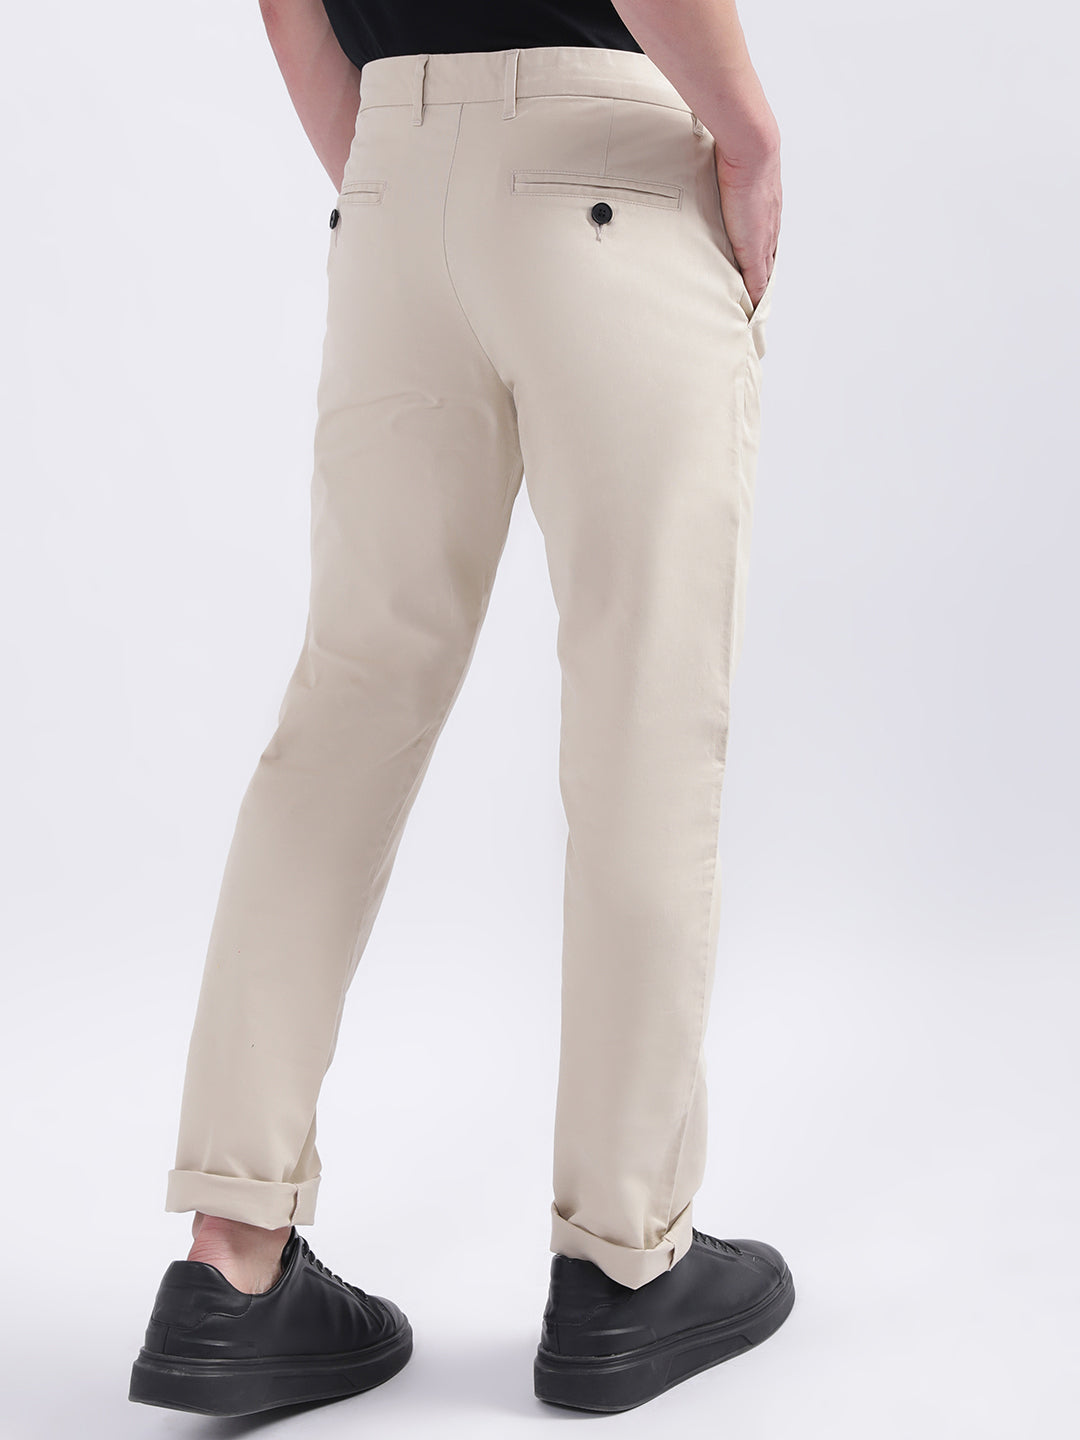 Mens Chinos Slim Fit Pants Flat Front Stretch Skinny Tapered Dress Pants  Comfort Casual Solid Trousers Beige at Amazon Men's Clothing store